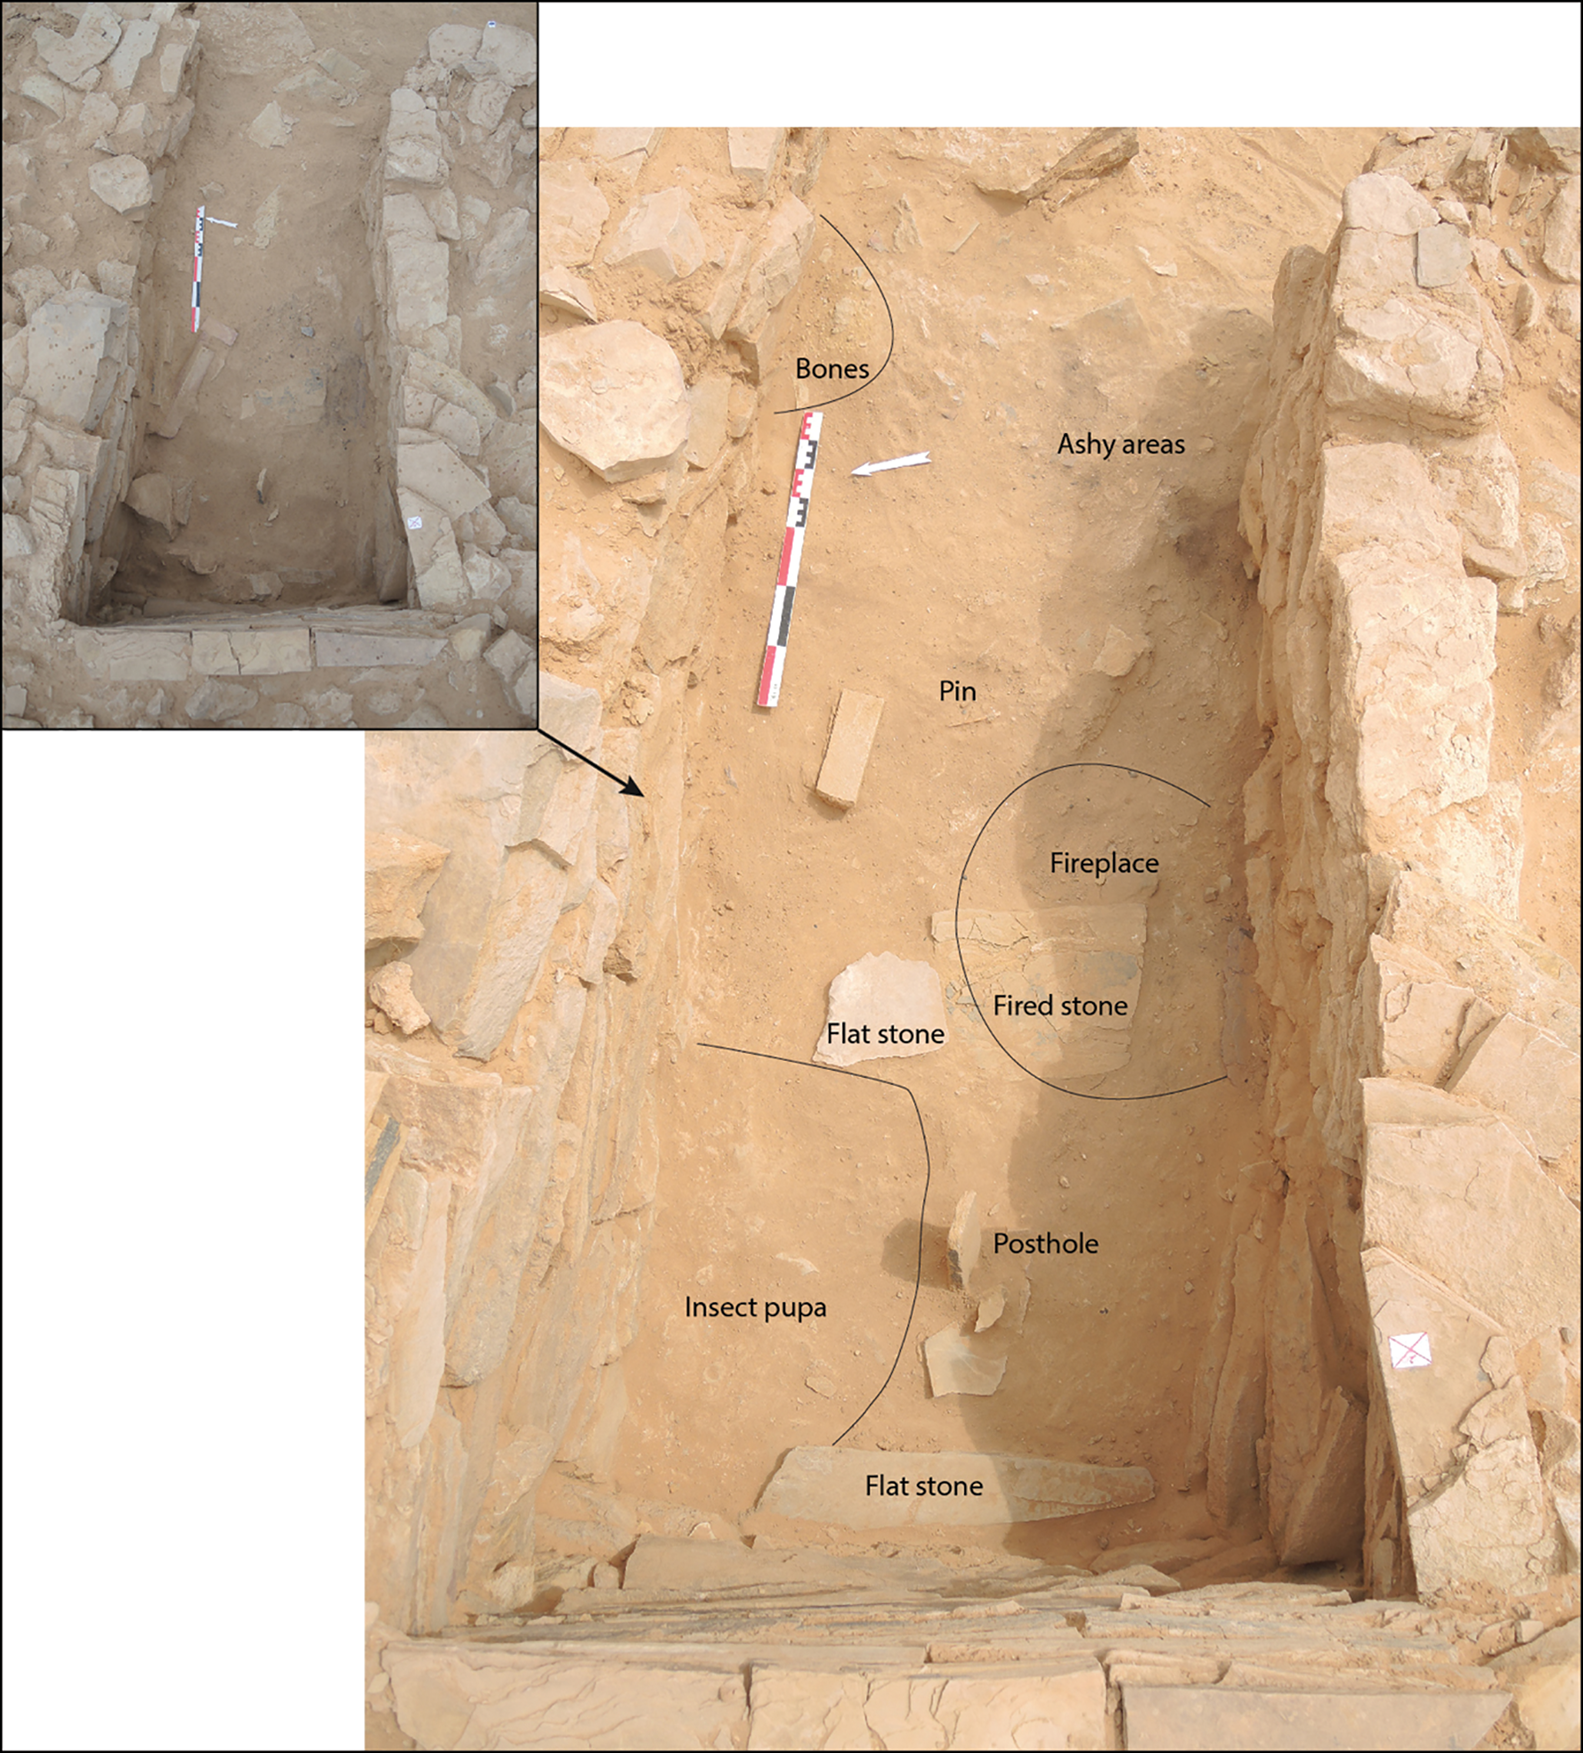 Marking the sacral landscape of a north Arabian oasis: a sixth